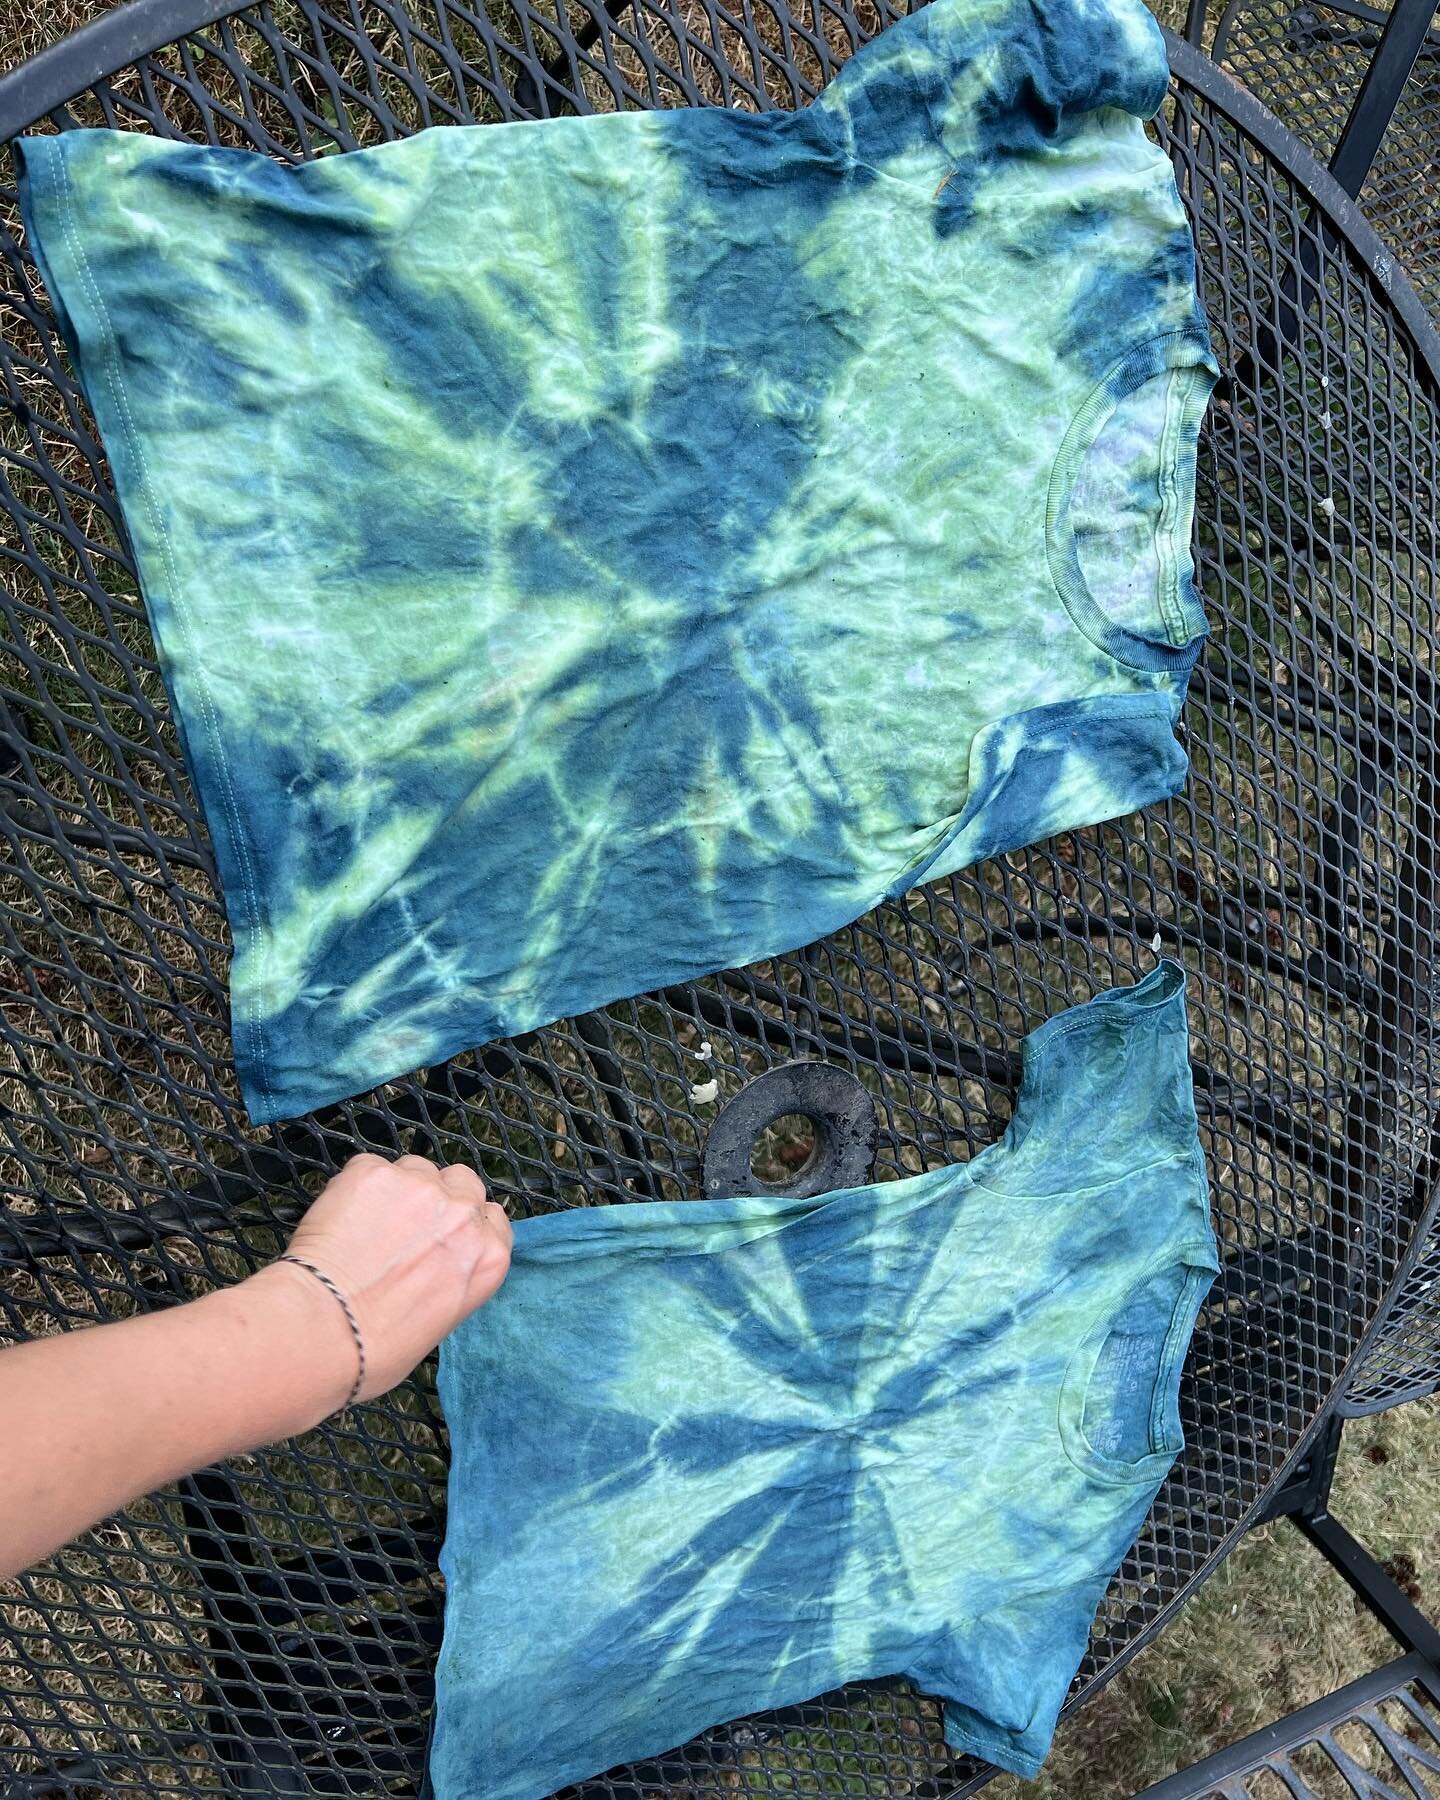 I was super impressed with these first batch indigo t shirts. I pretreated with soy - 2 dips and let it cure for&hellip;.10 months??? Just until my indigo grew back in. It was fun making them and the deep blue is super impressive! #indigo #tiedye #na